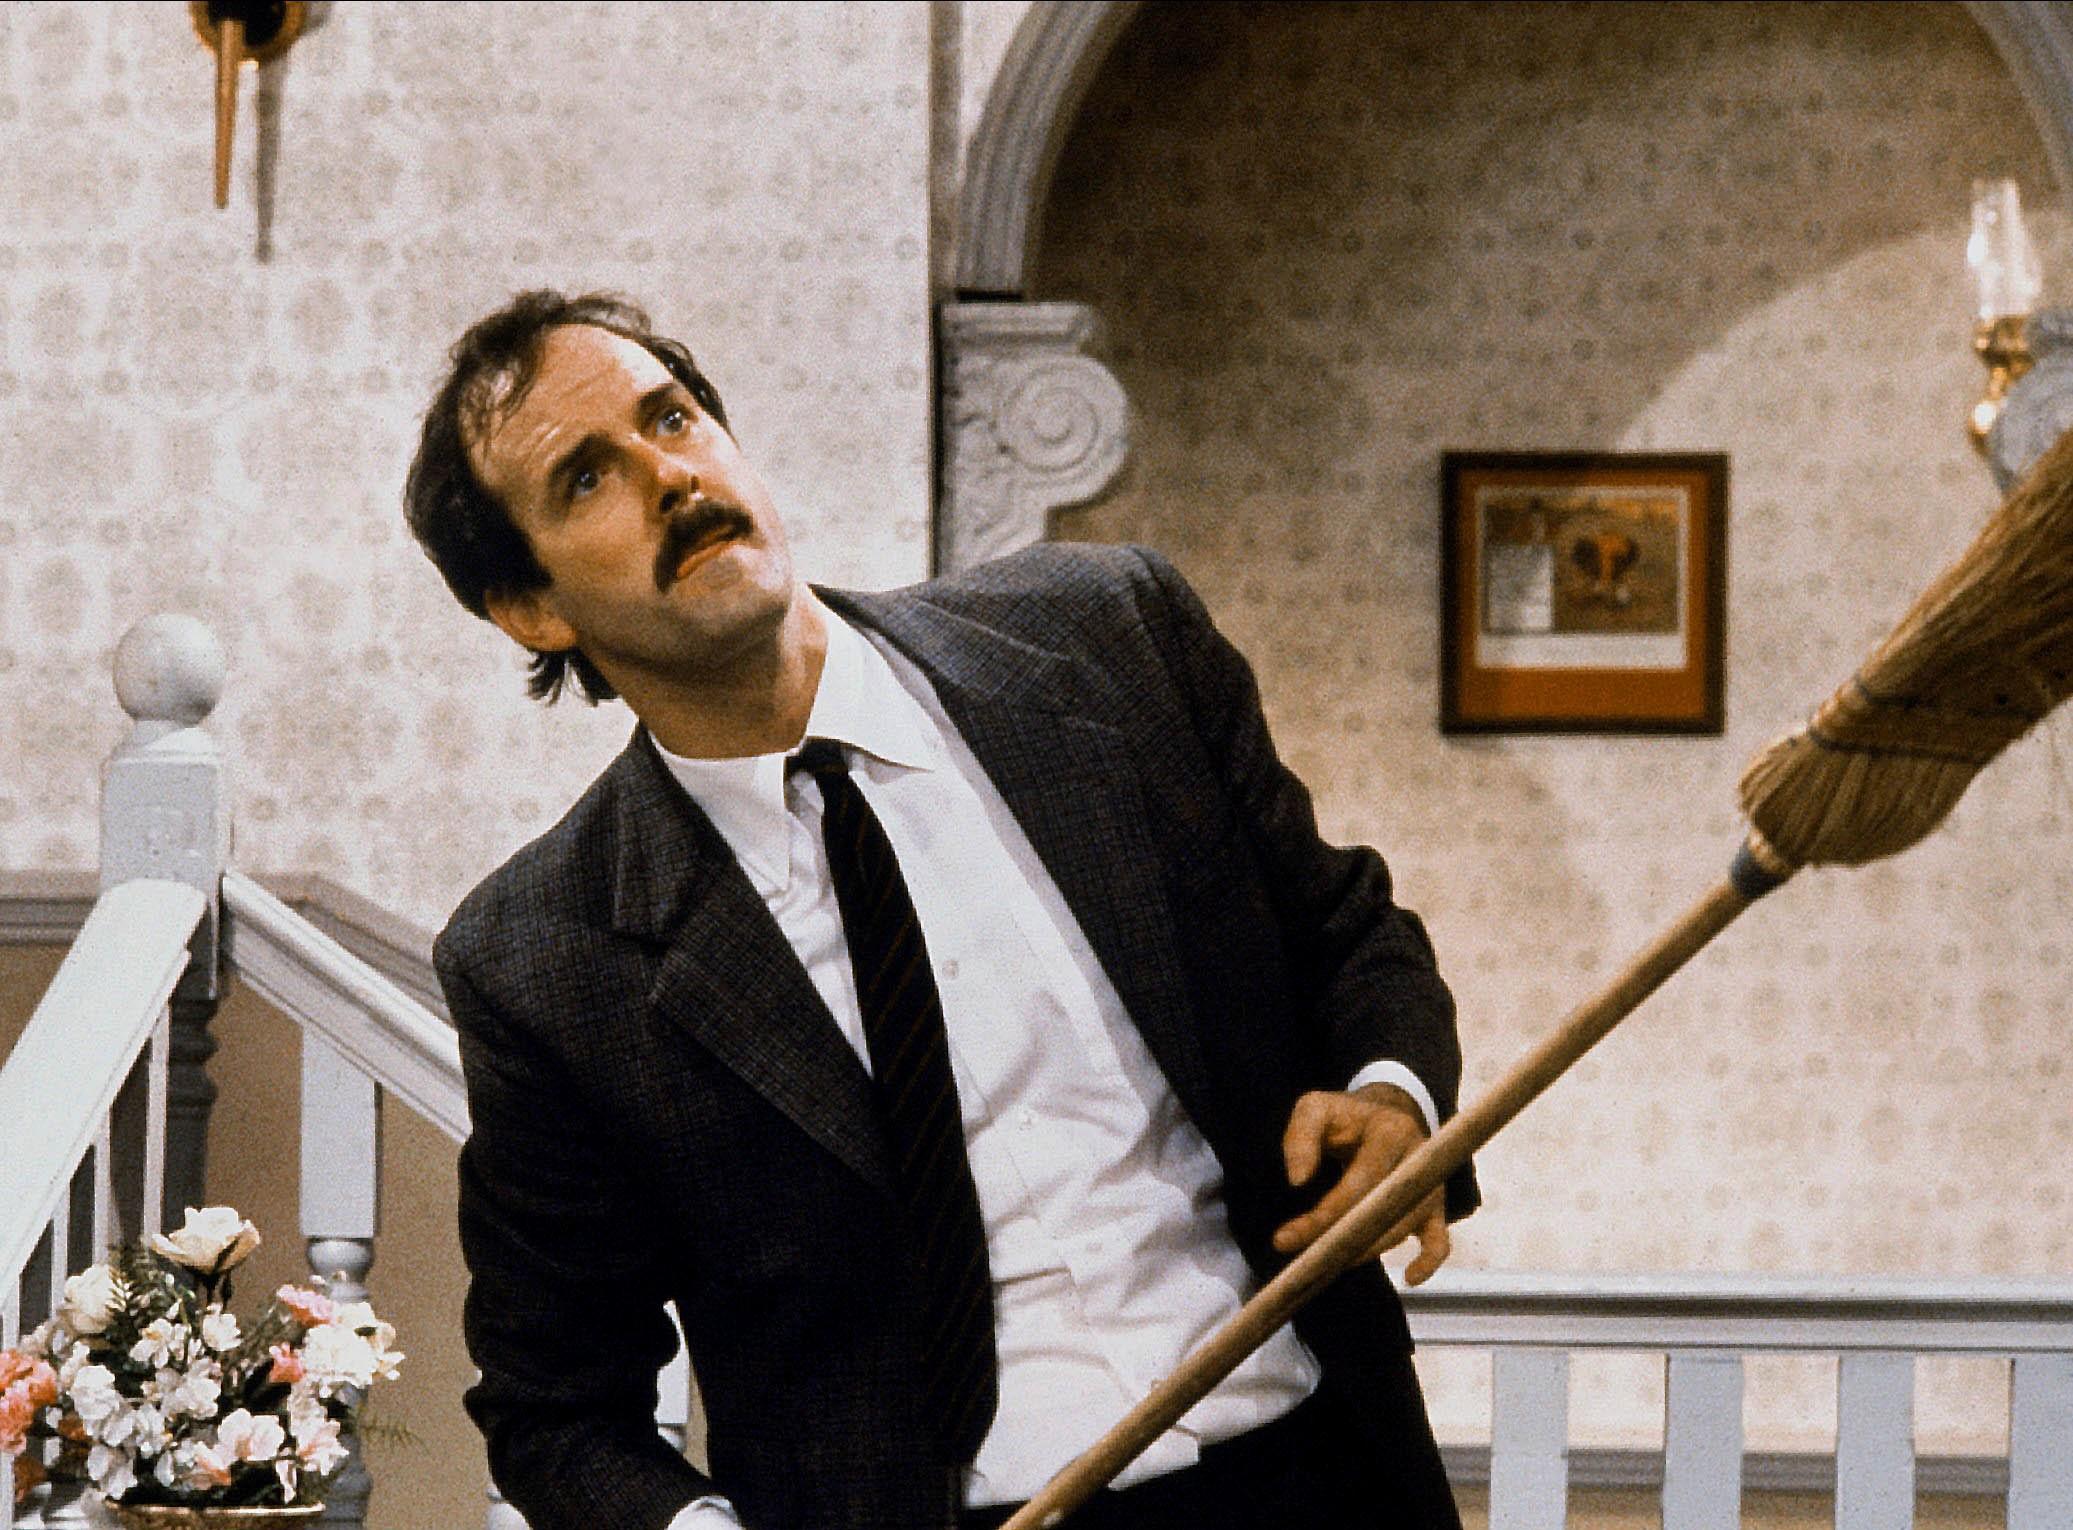 A still from Fawlty Towers